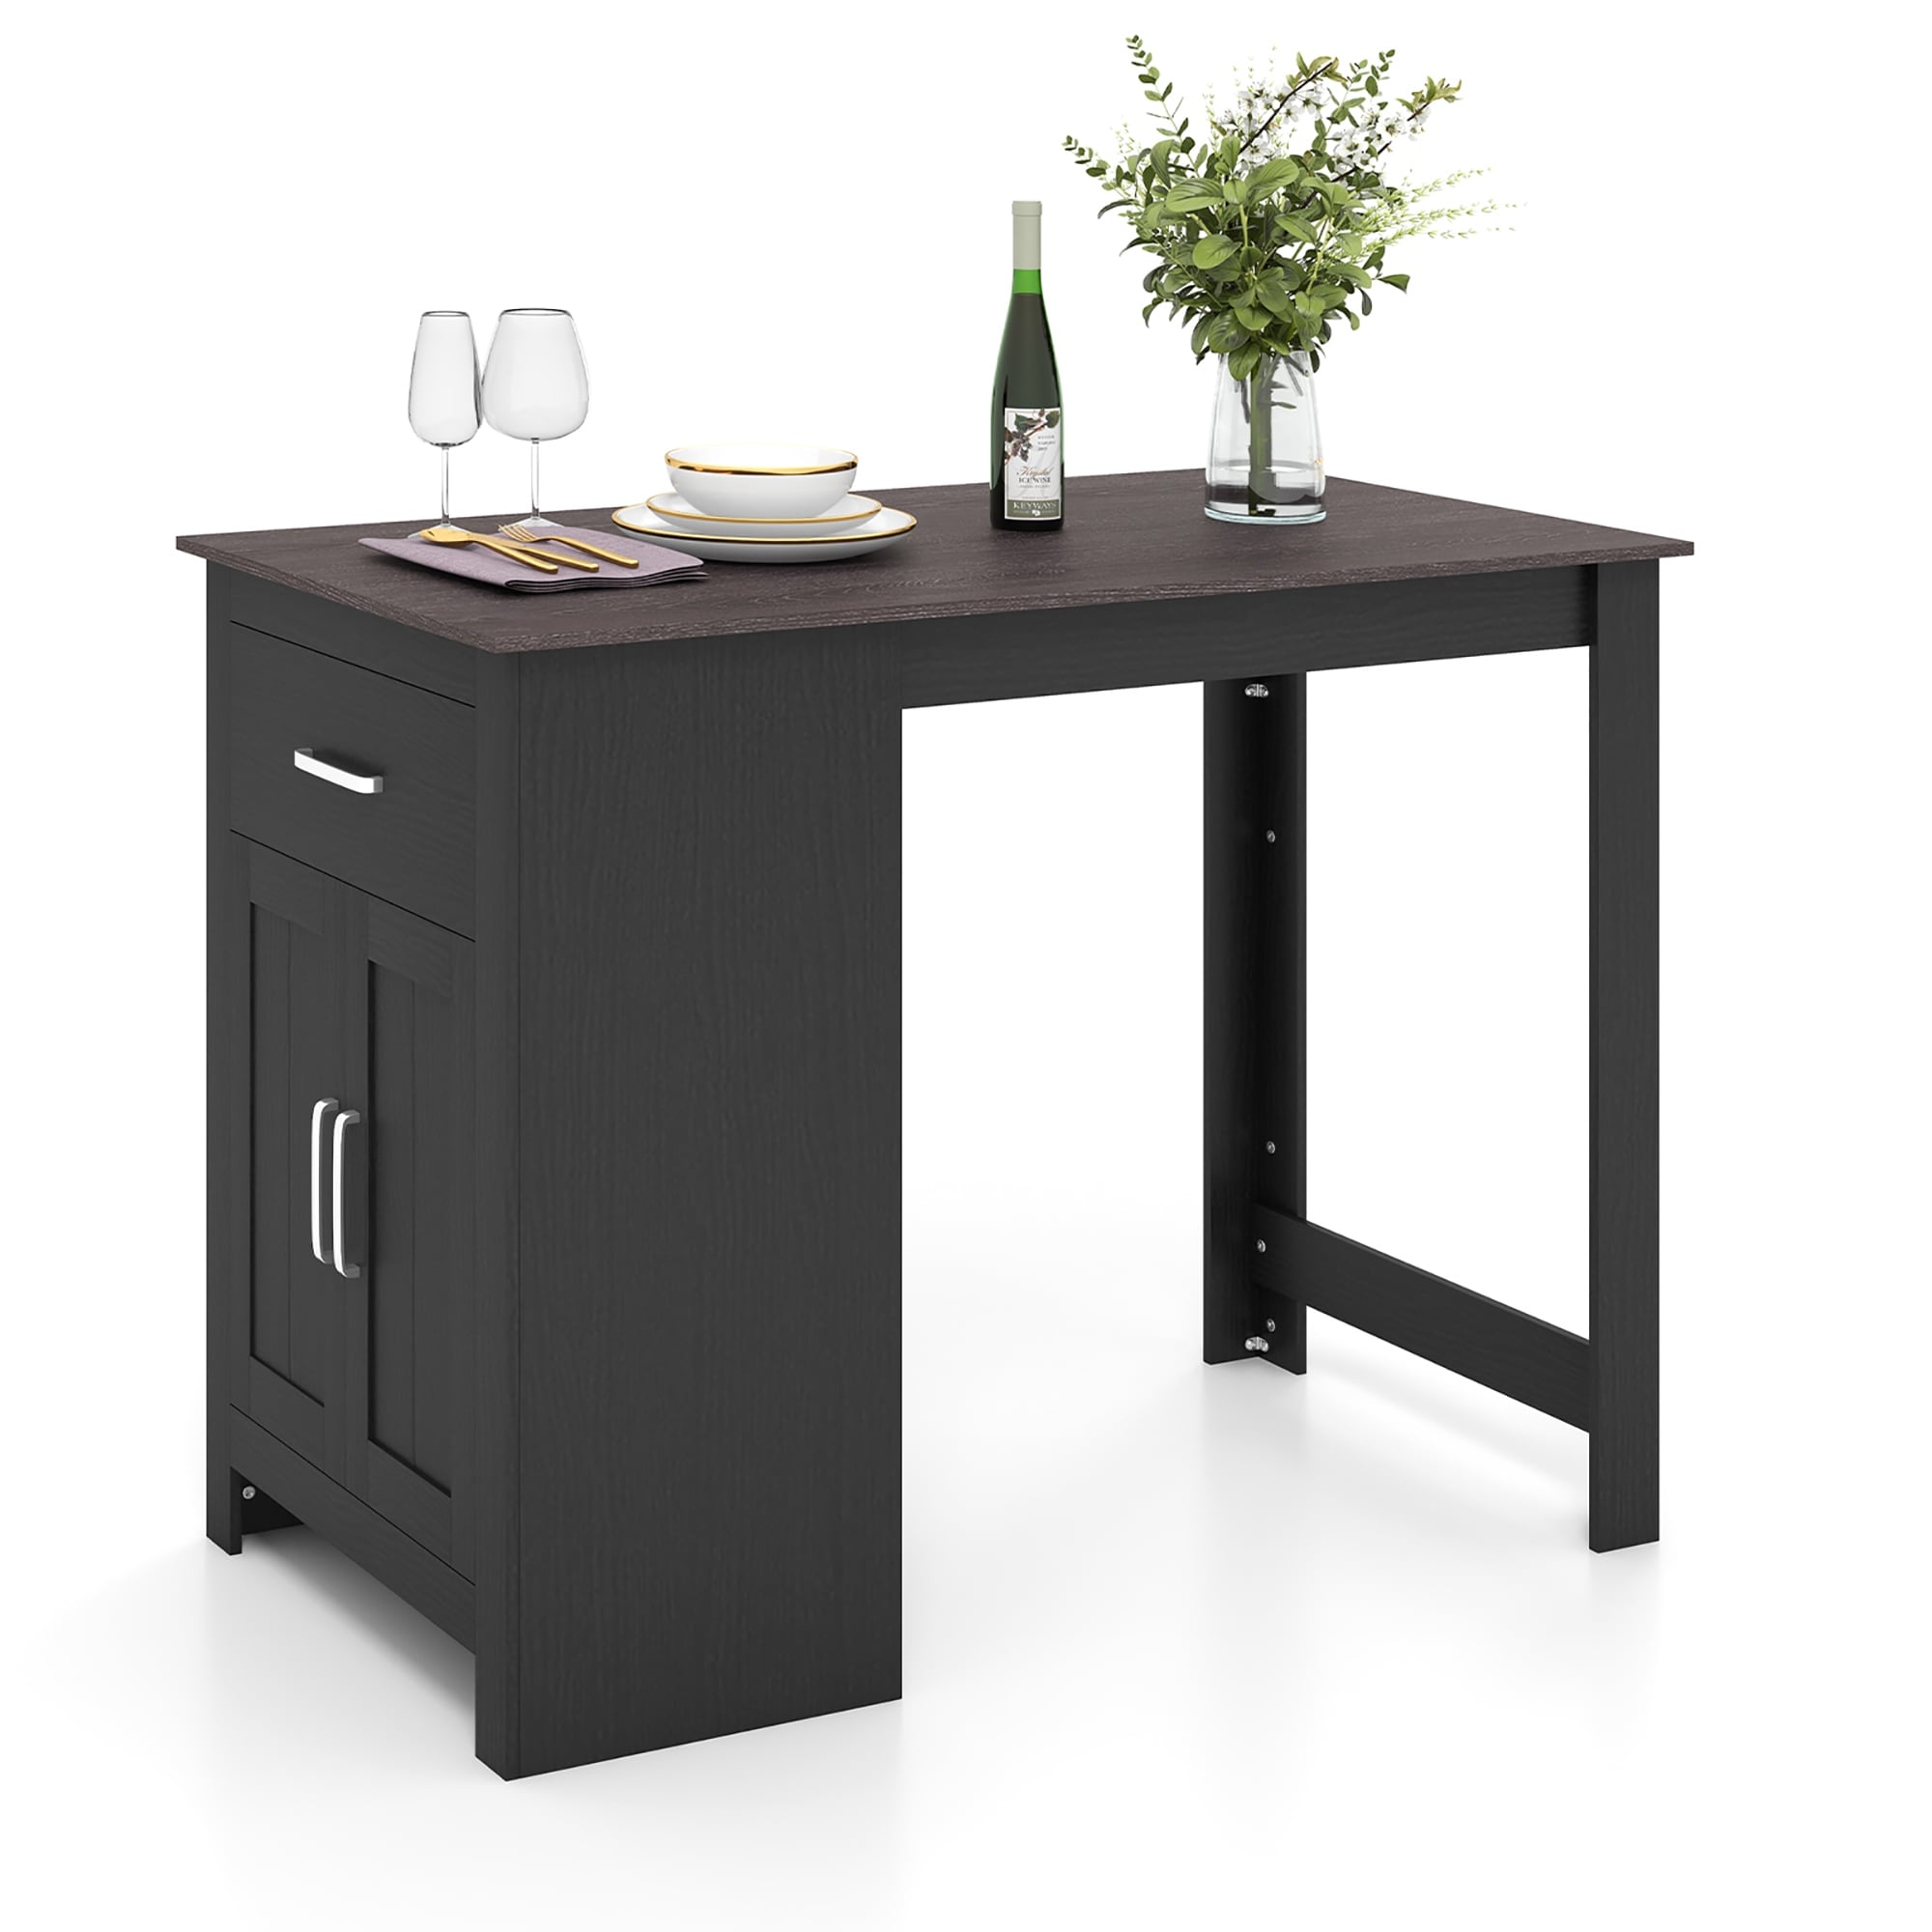 Costway Dining Table 47 inch Kitchen Dining Table Rectangular for - Dark Grey